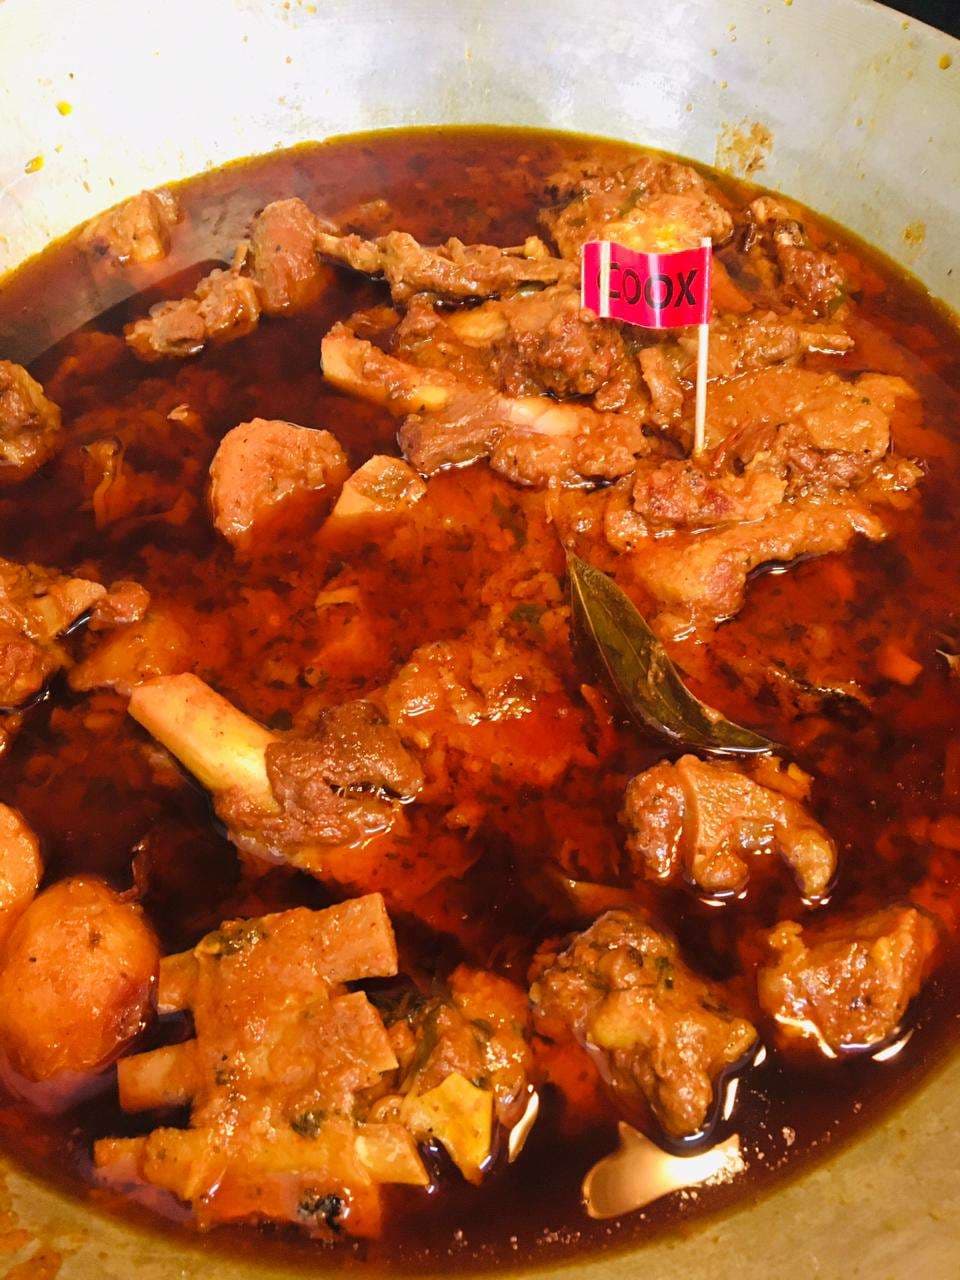 Tasty Mutton Rogan Josh cooked by COOX chefs cooks during occasions parties events at home